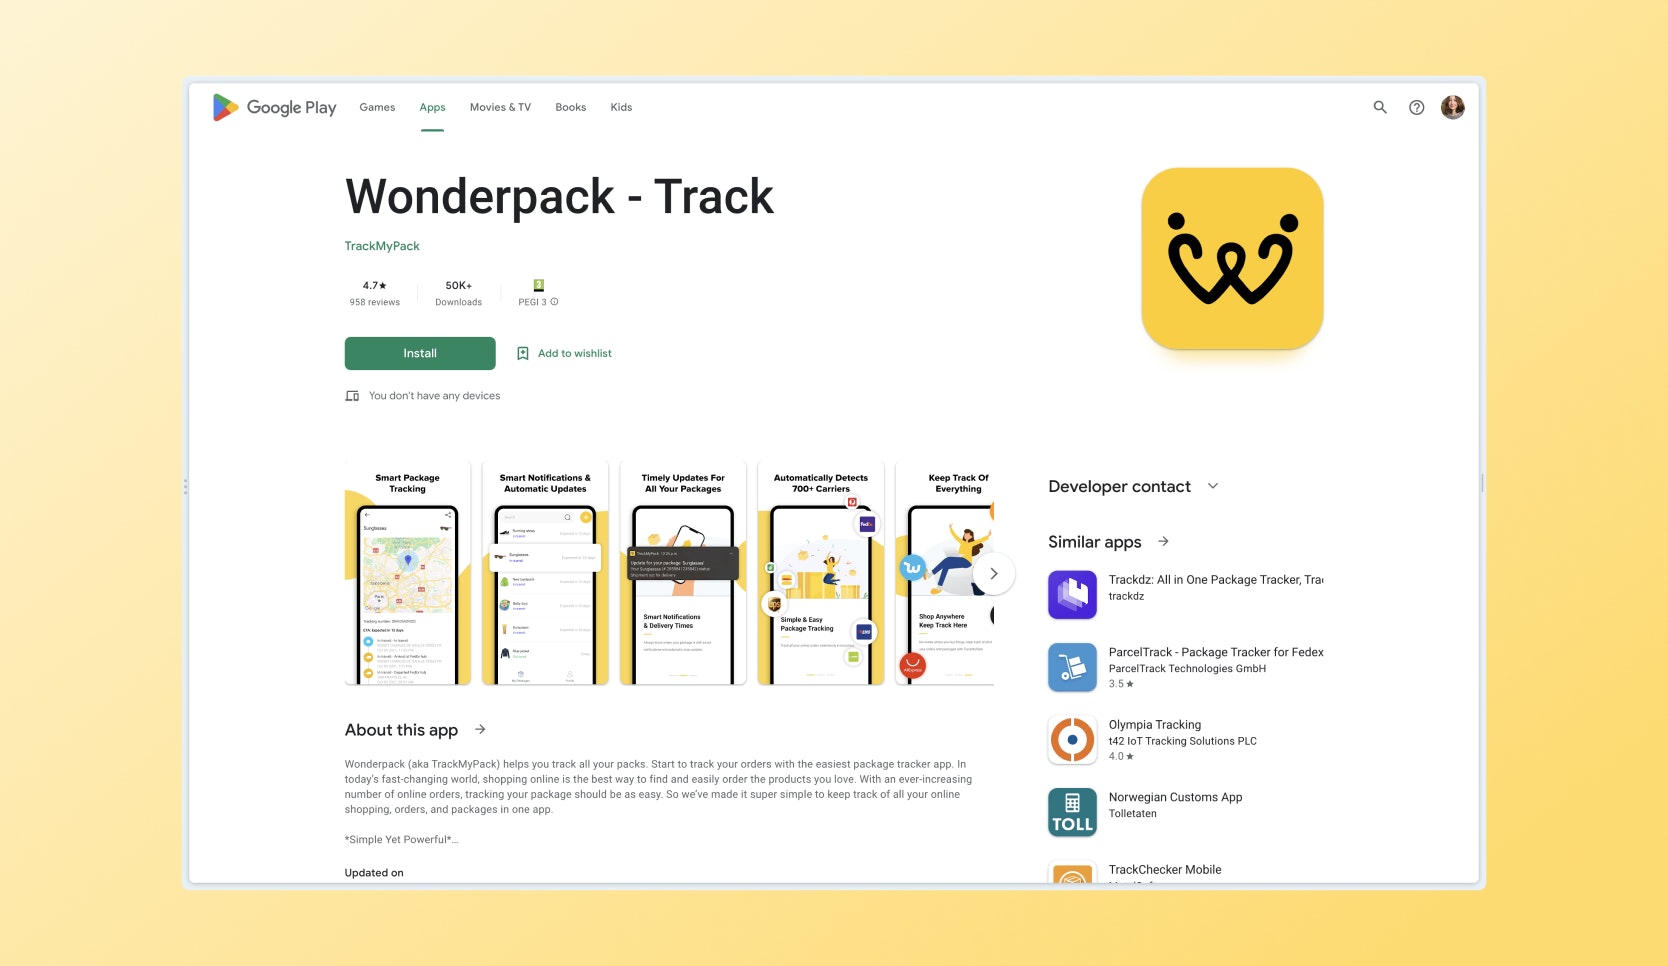 Google Playstore page for TrackMyPack